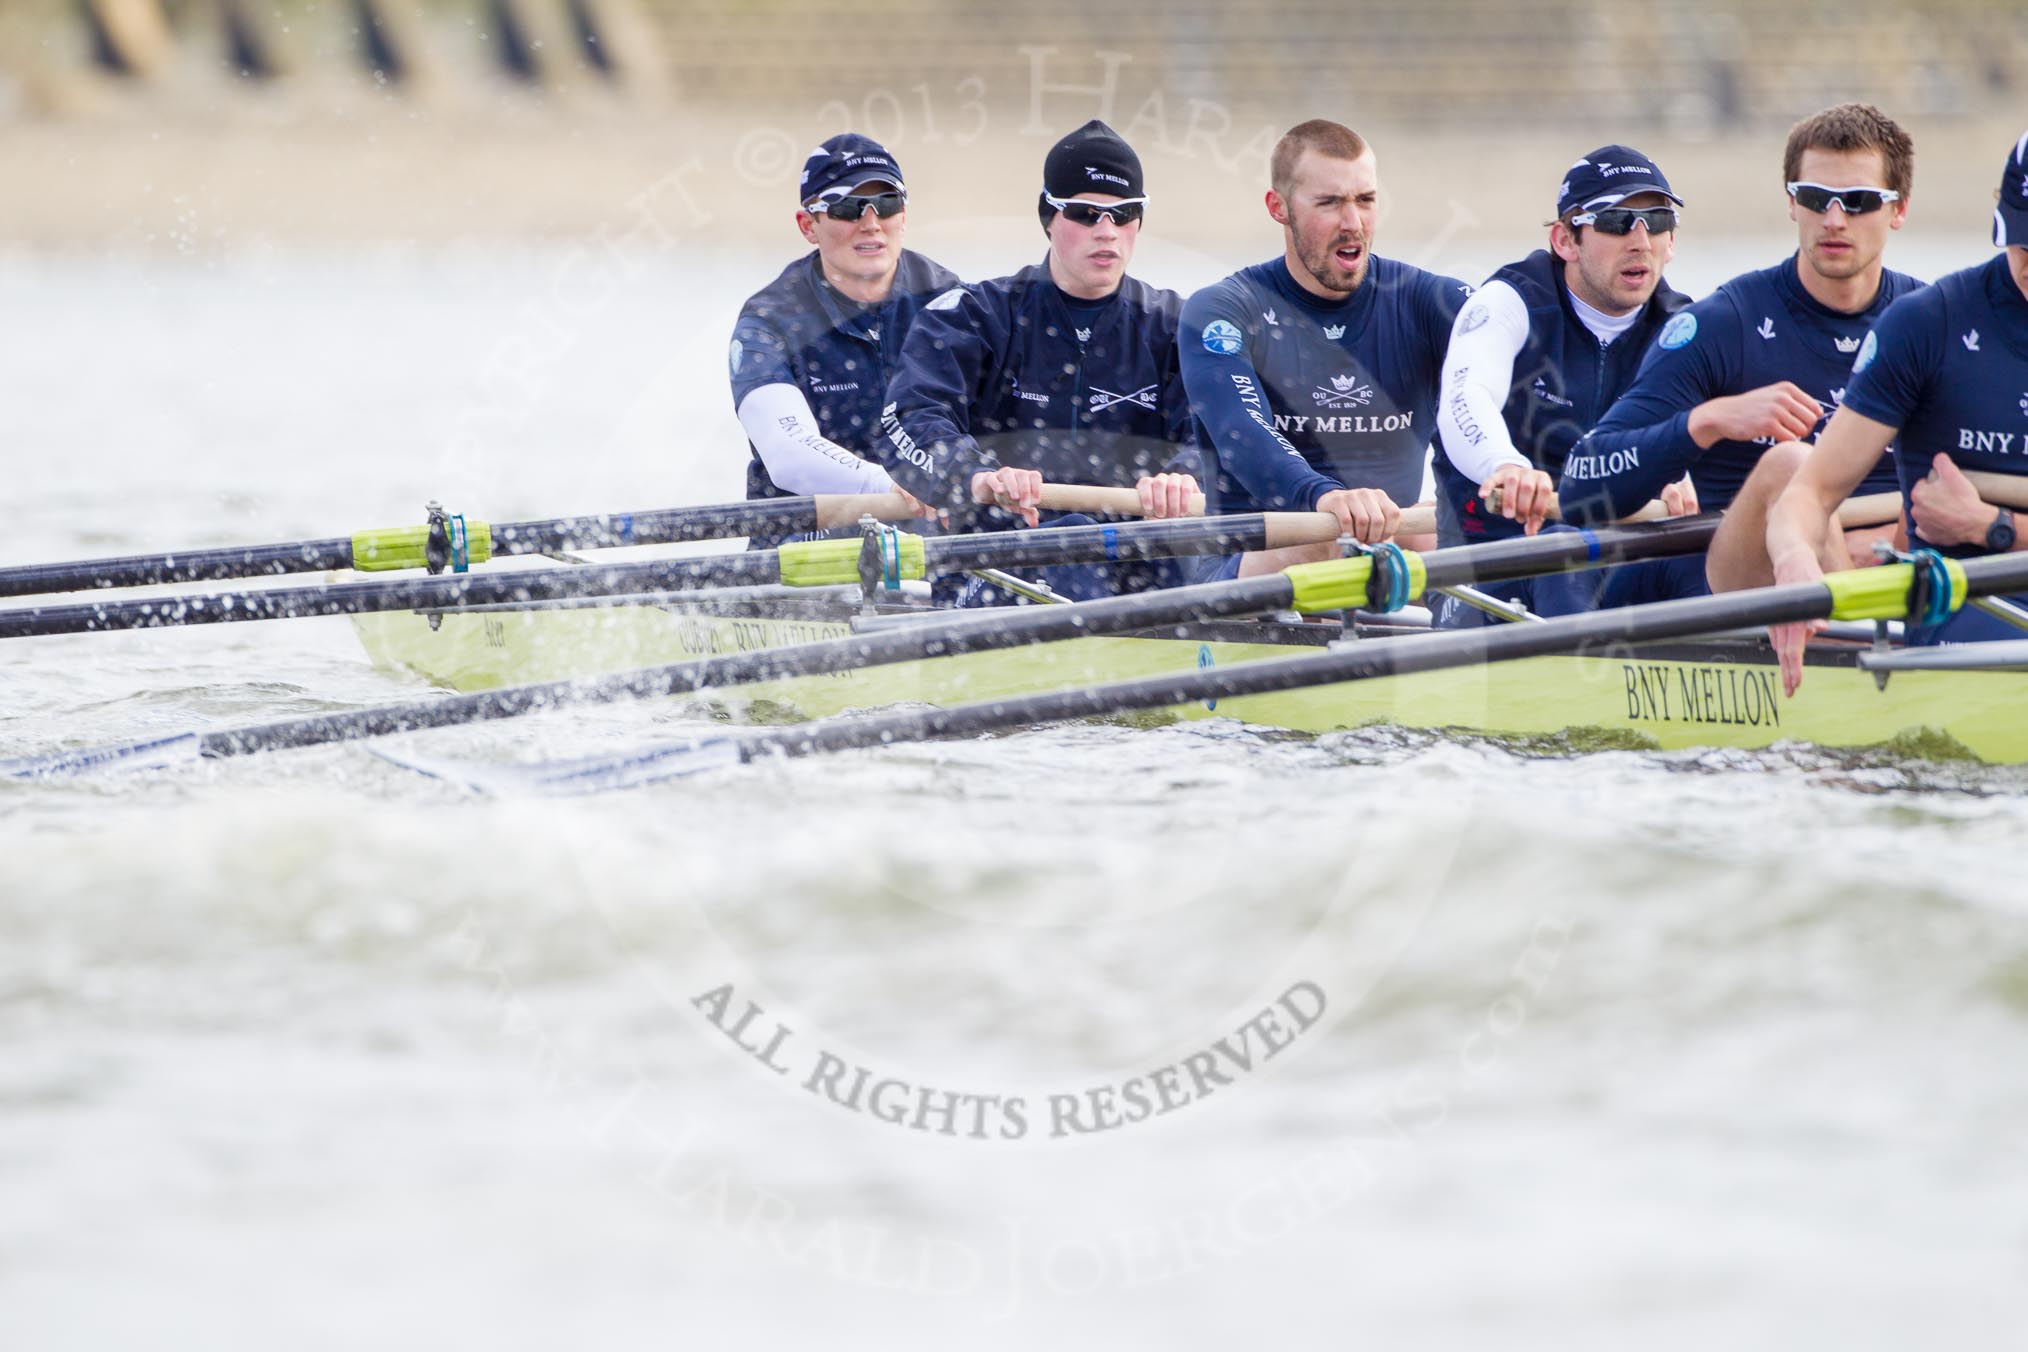 The Boat Race season 2013 -  Tideway Week (Friday) and press conferences.
River Thames,
London SW15,

United Kingdom,
on 29 March 2013 at 11:17, image #90